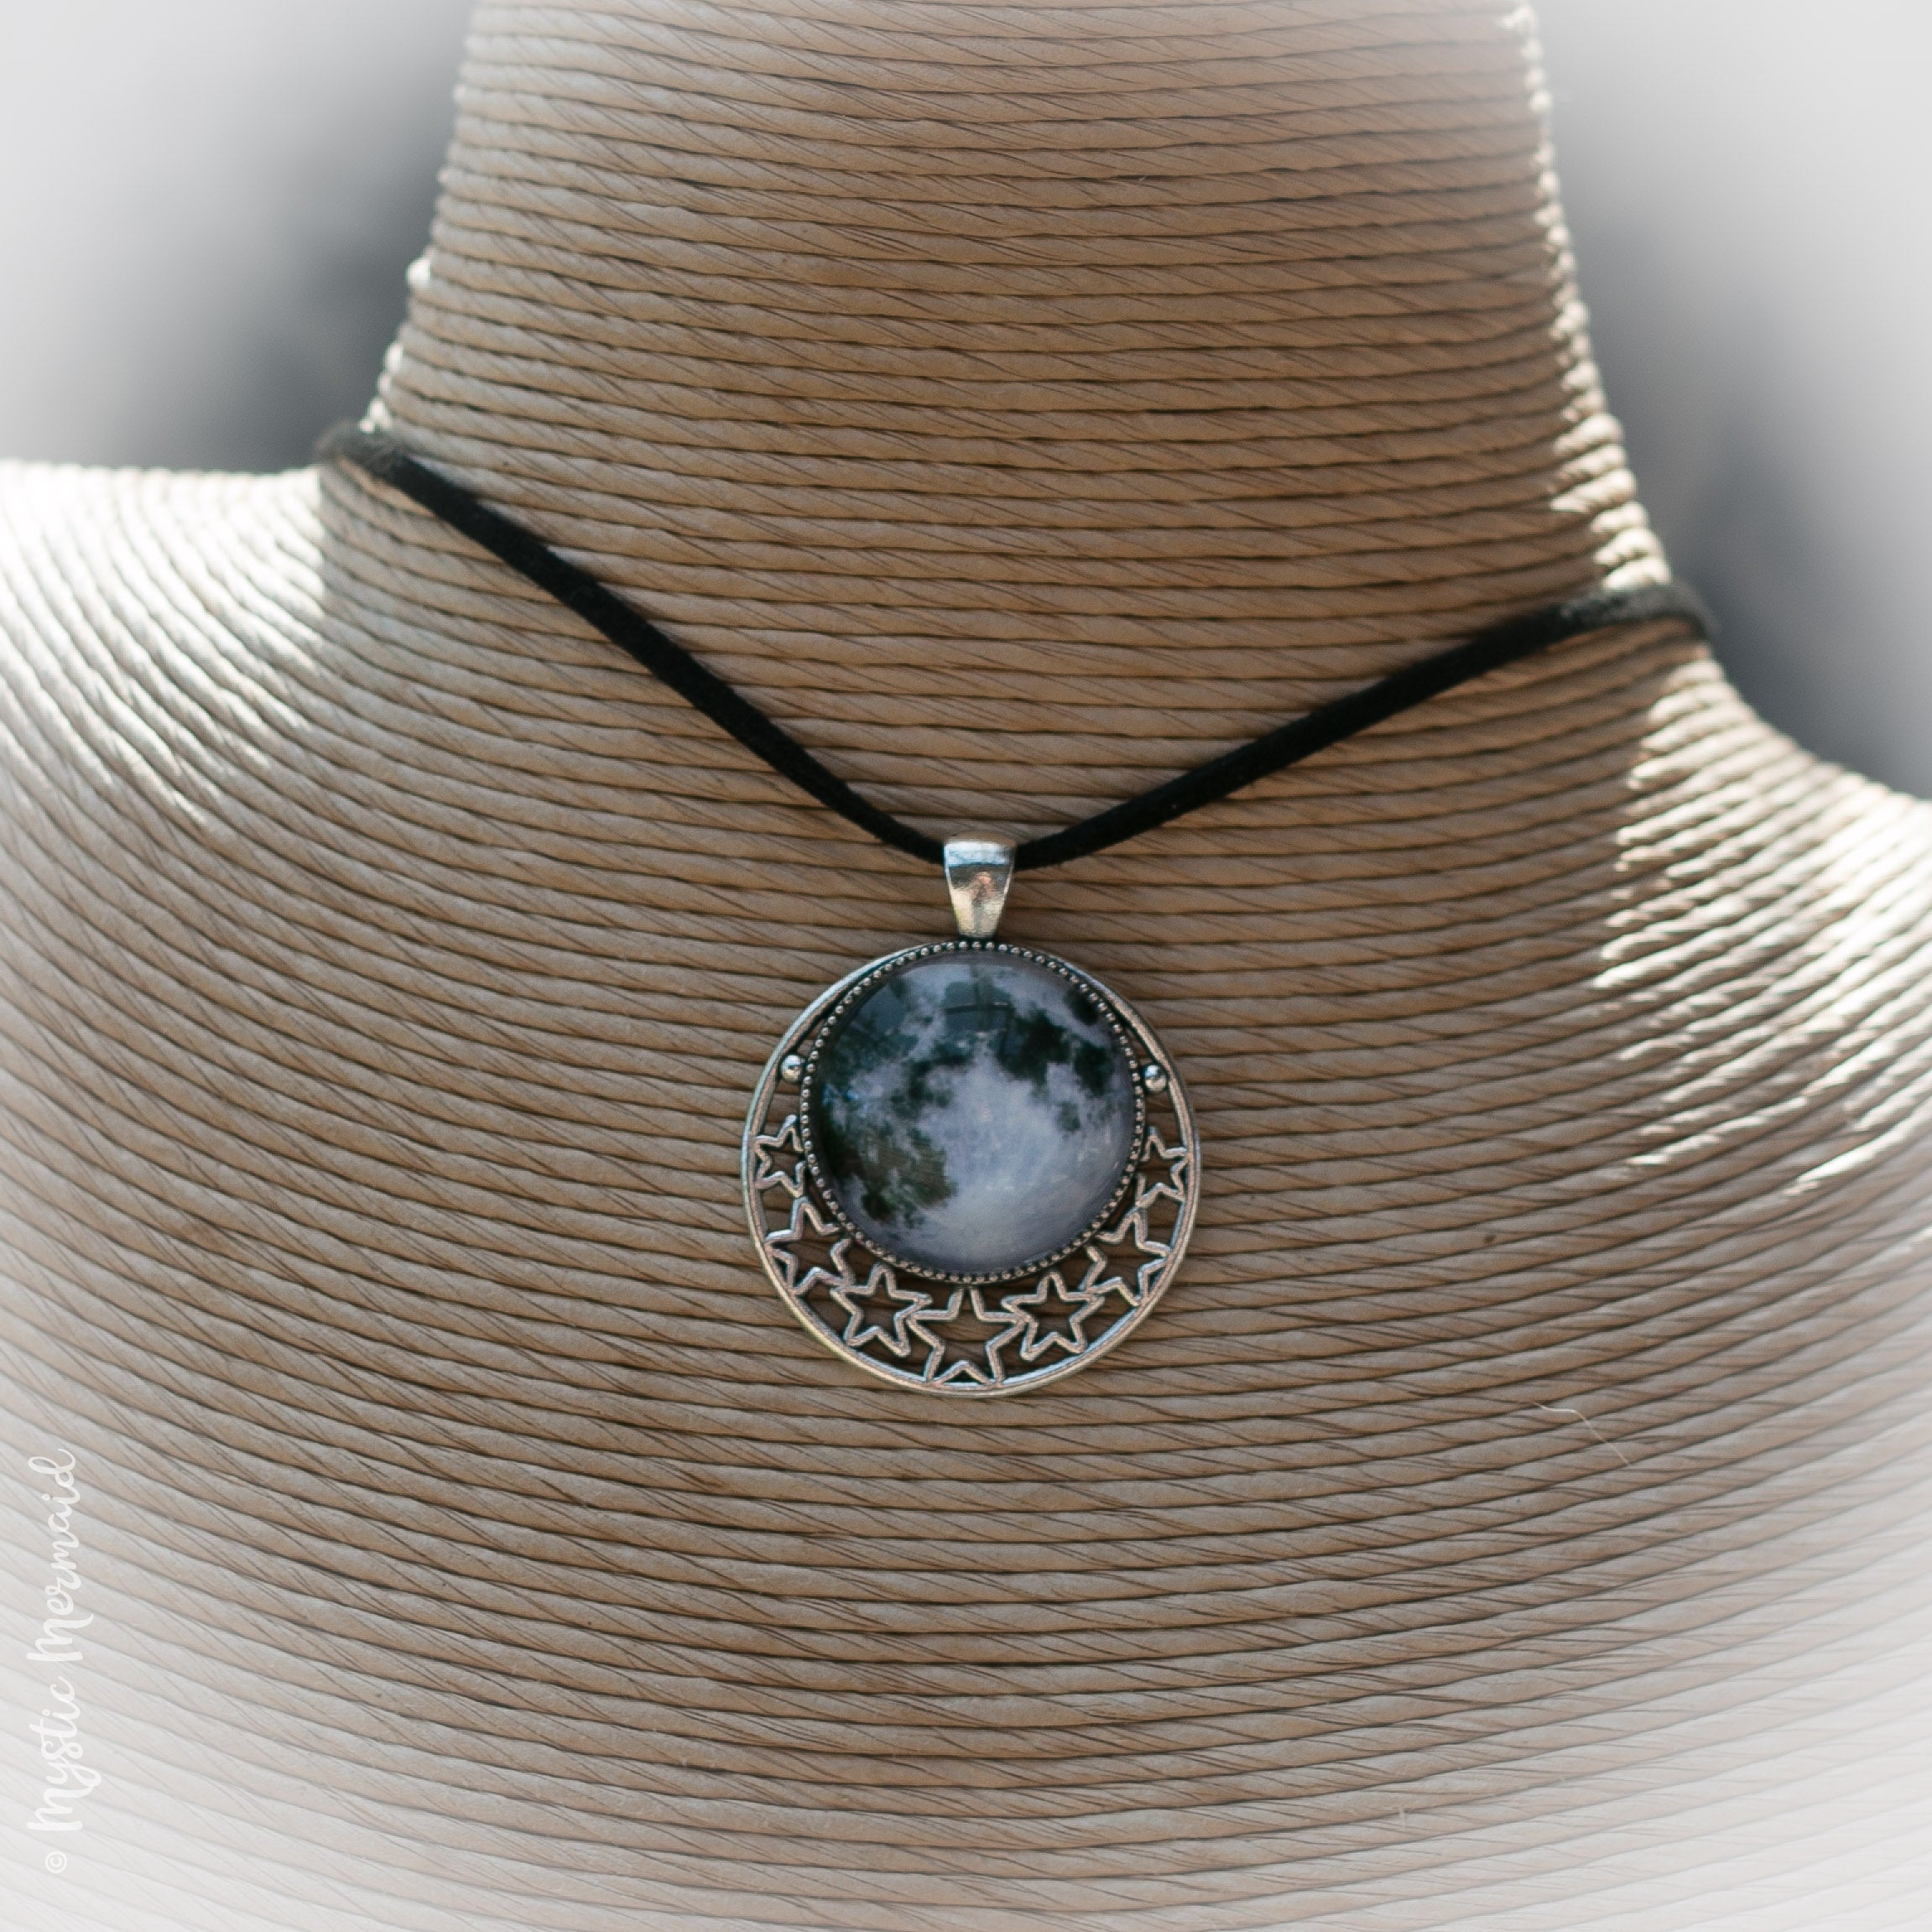 Swoon, Swoon, Full Moon amongst the Stars Necklace